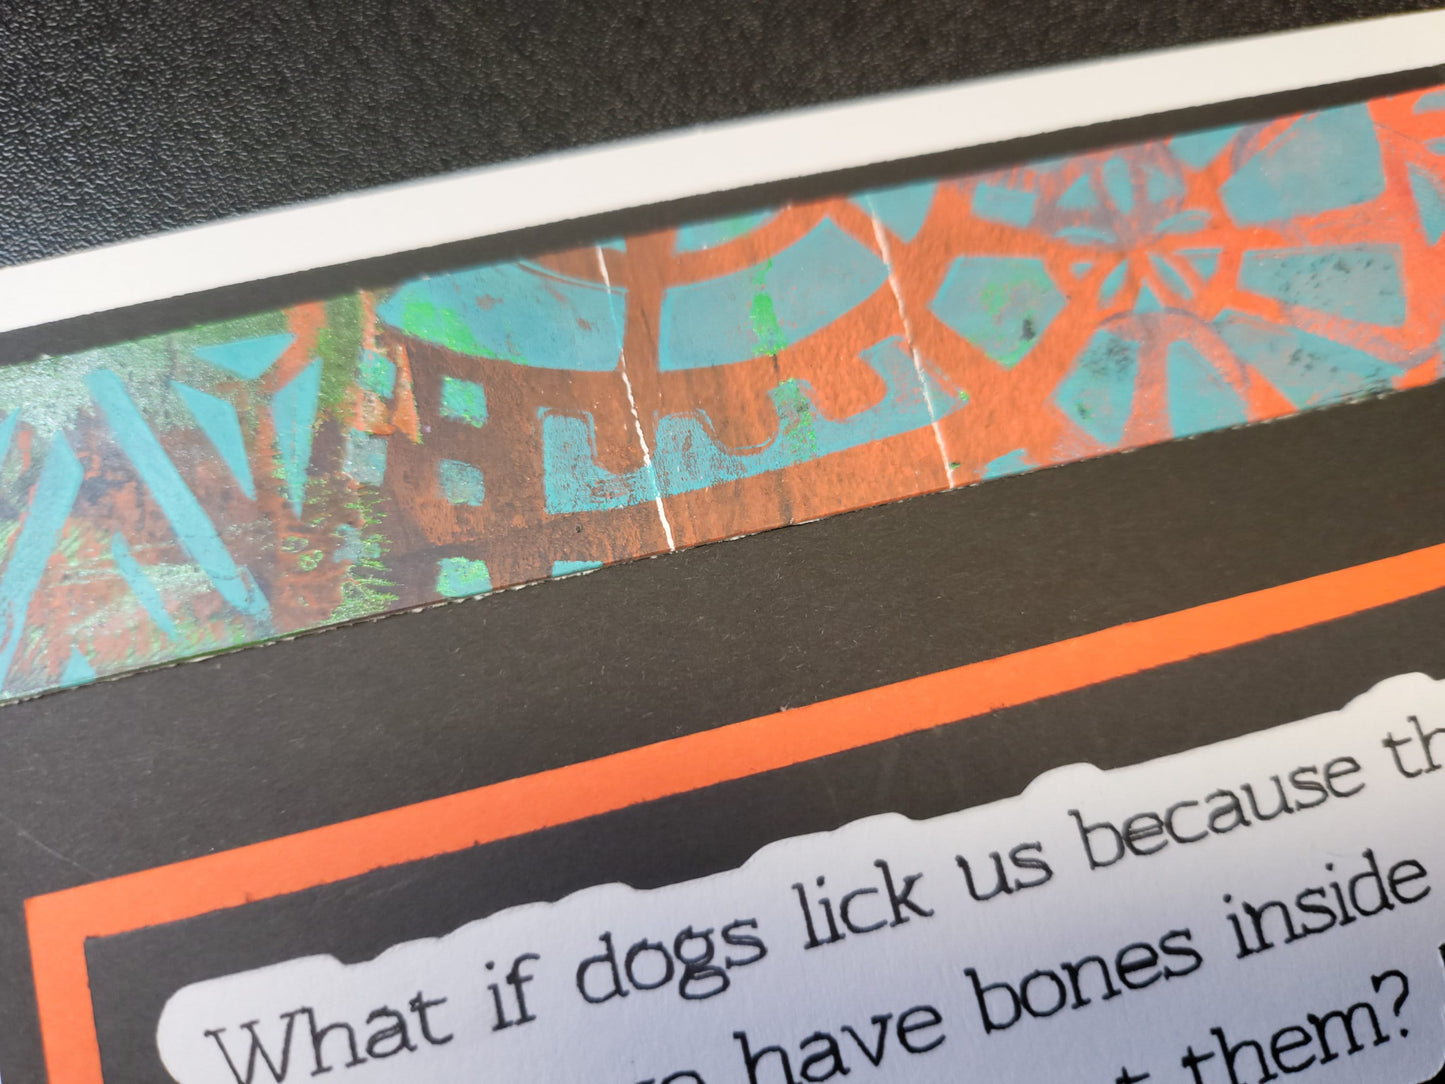 Dogs and Bones (with matching designed envelope) - Funny - Unique Acrylic Monotype